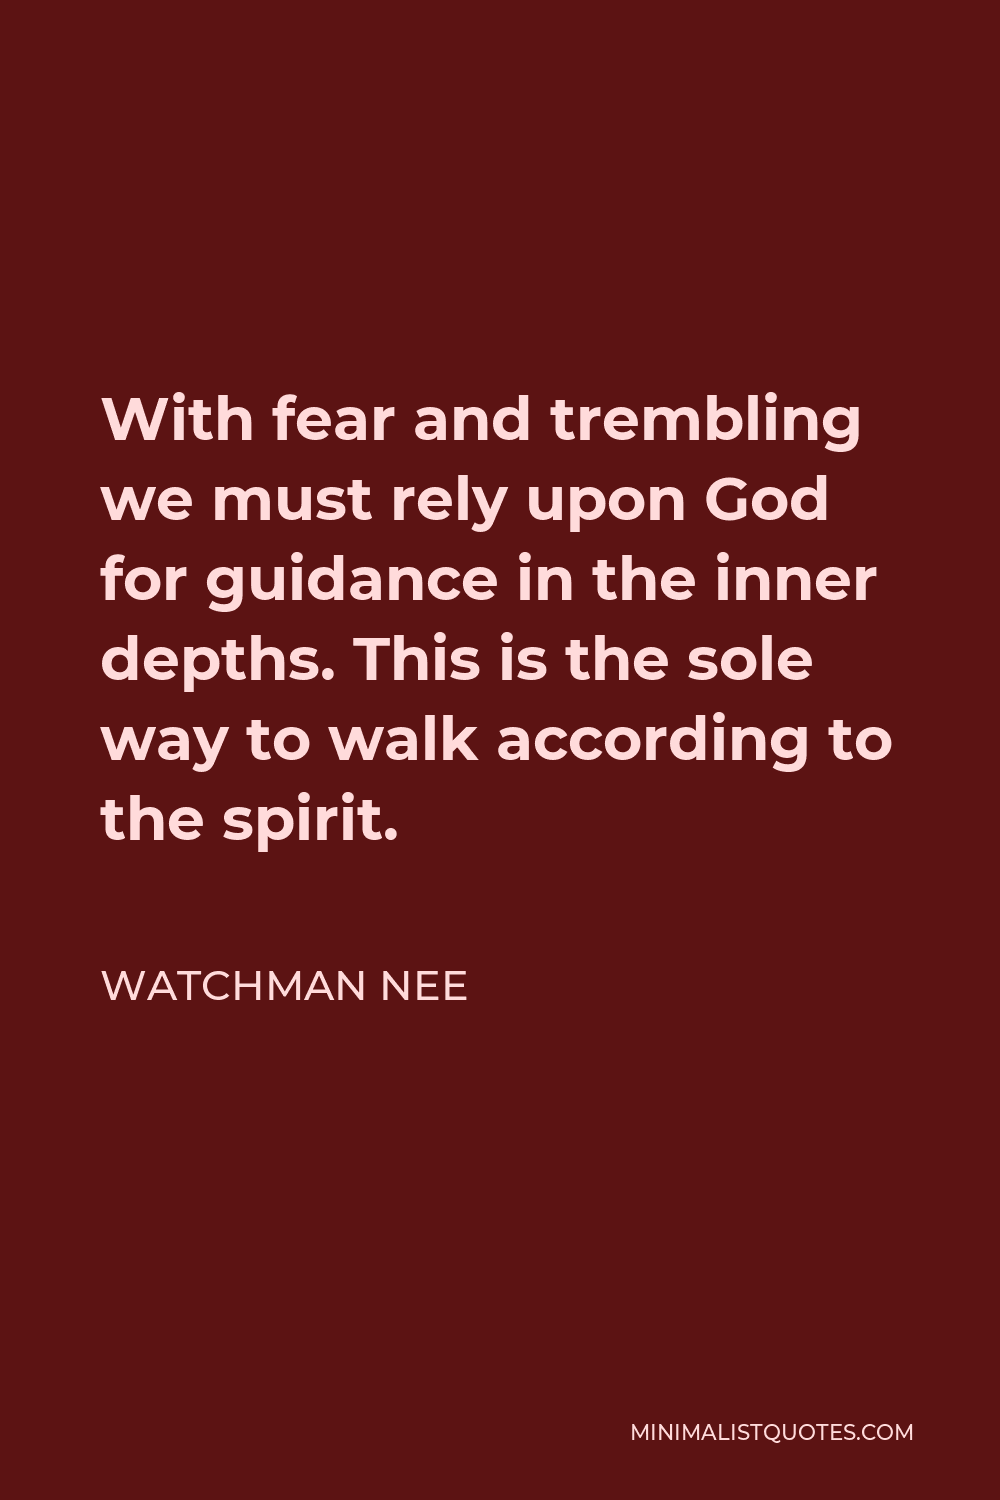 Watchman Nee Quote - With fear and trembling we must rely upon God for guidance in the inner depths. This is the sole way to walk according to the spirit.